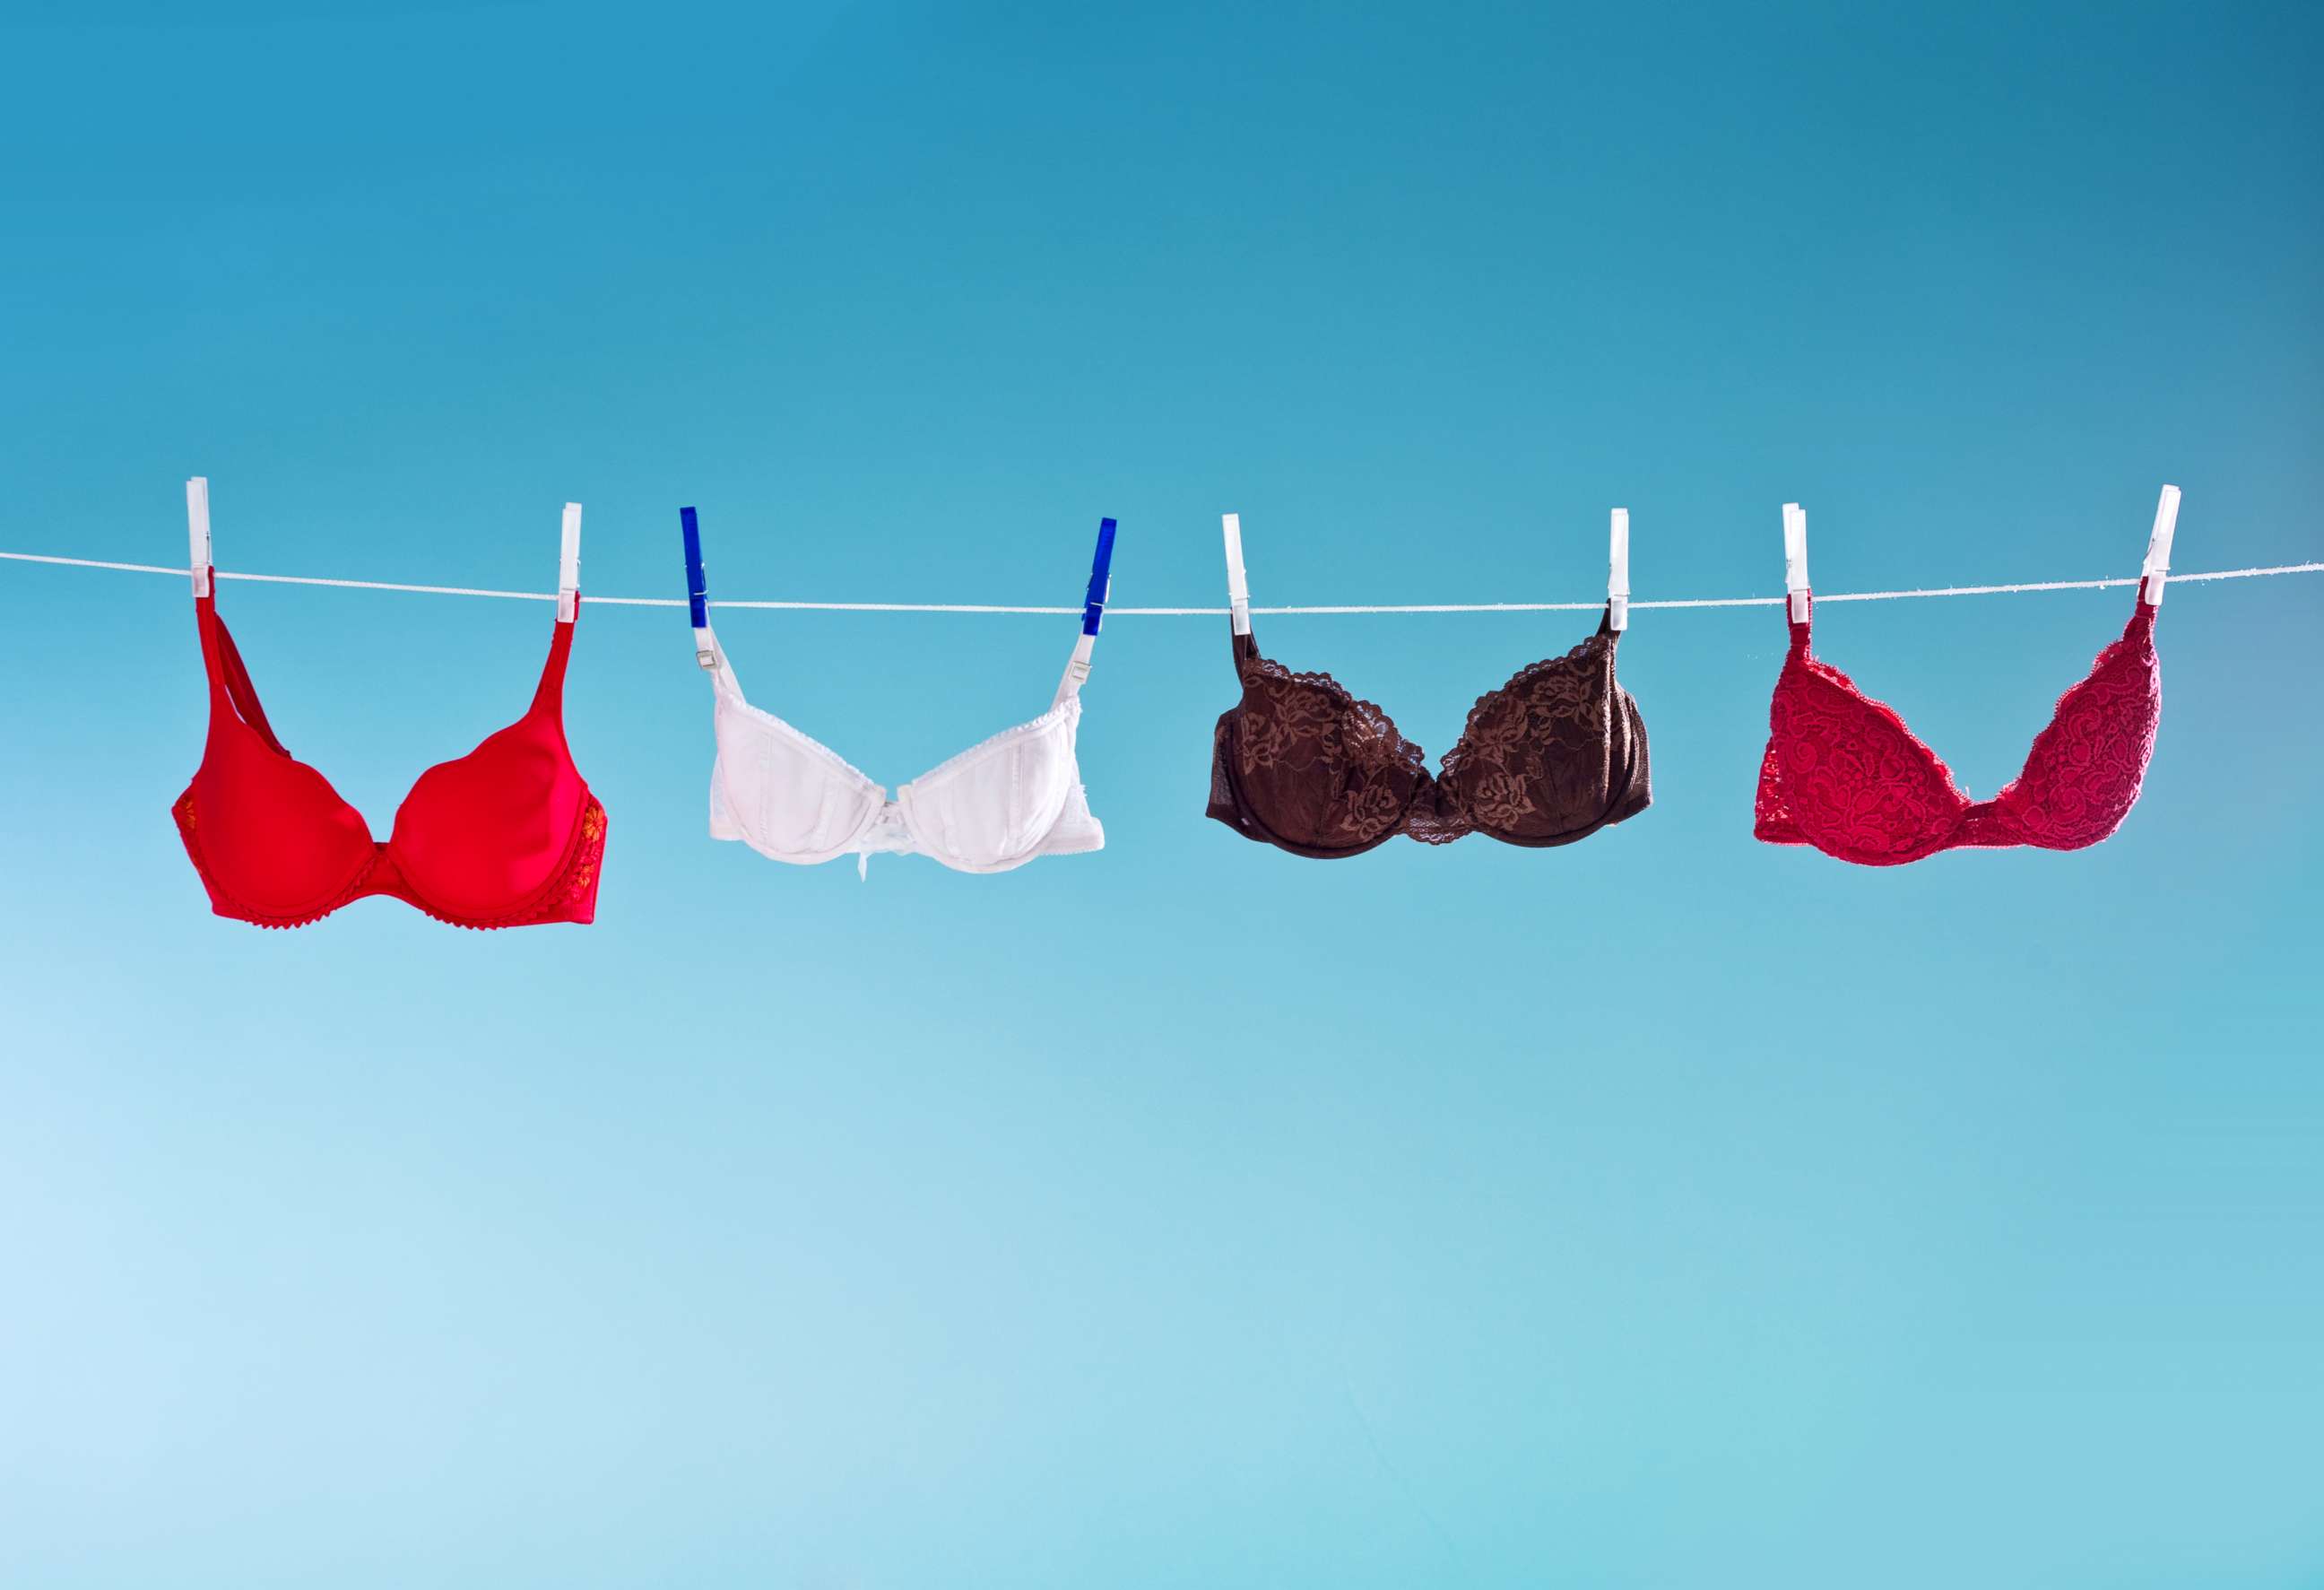 PHOTO: Laundry hangs out on a clothesline in this stock photo.